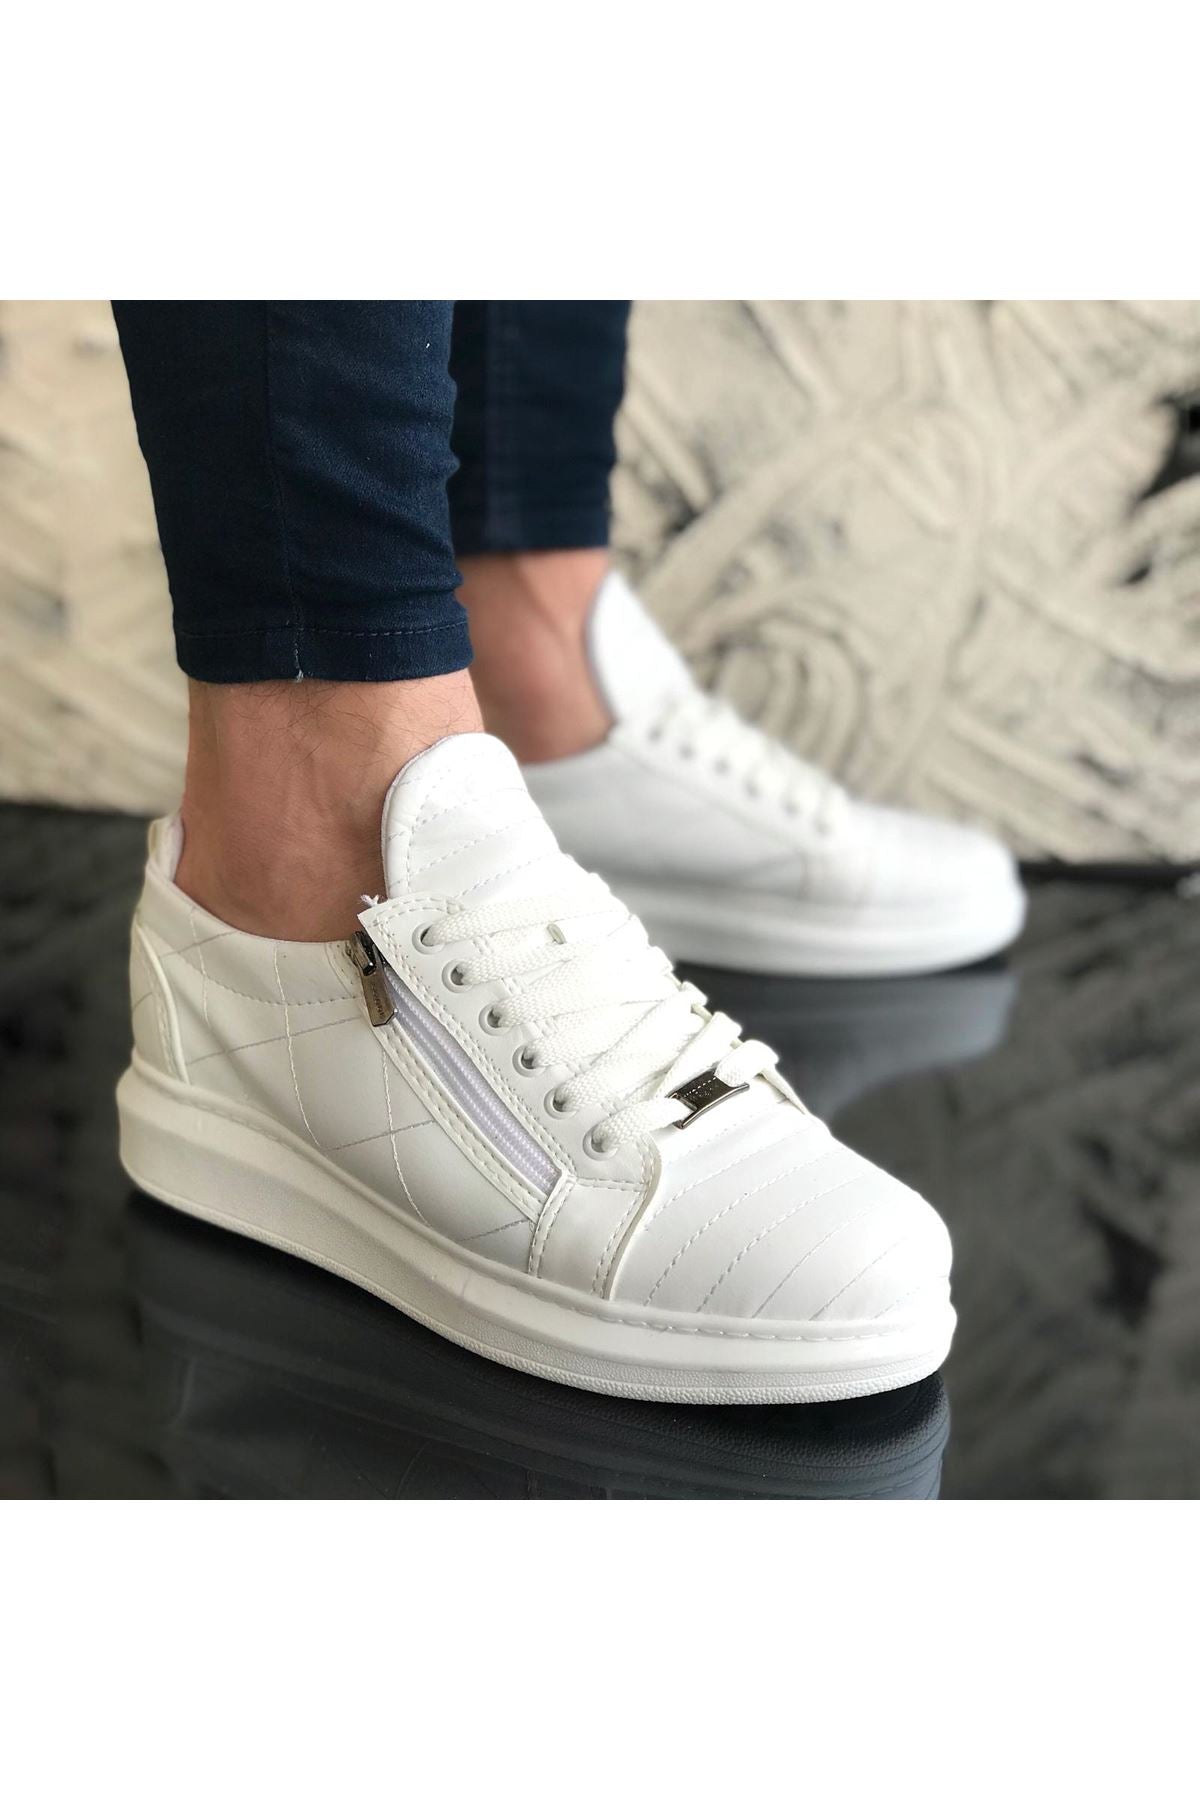 WG502 White Men's Casual Shoes - STREETMODE™